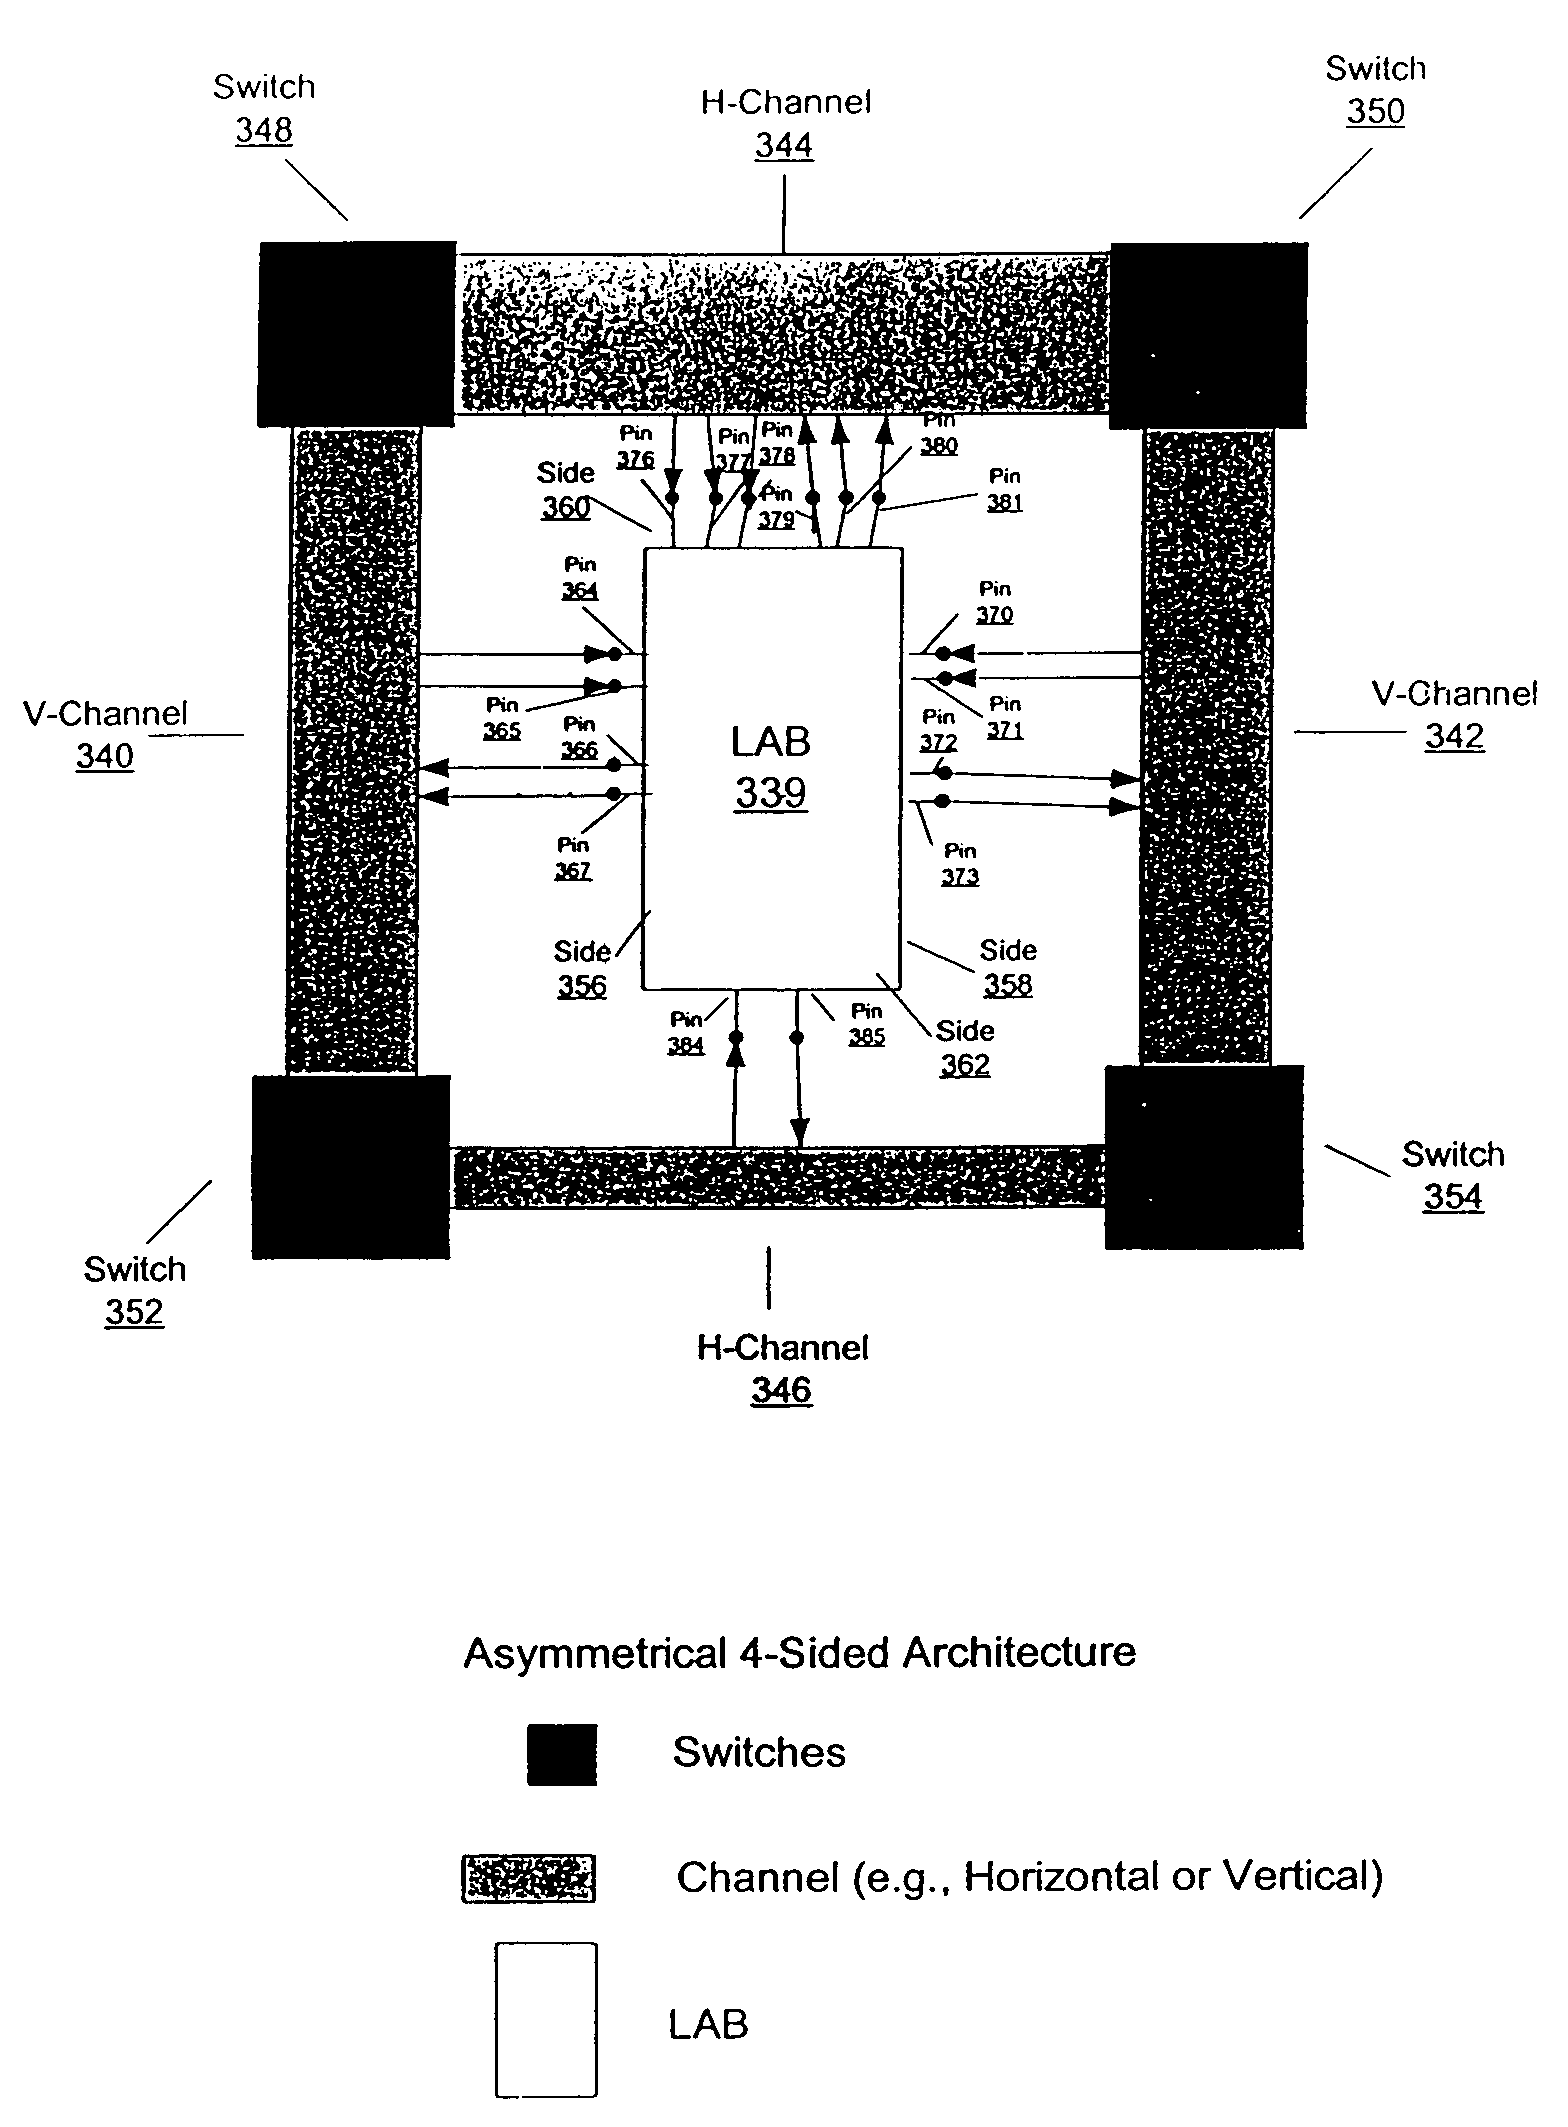 Routing architecture for a programmable logic device